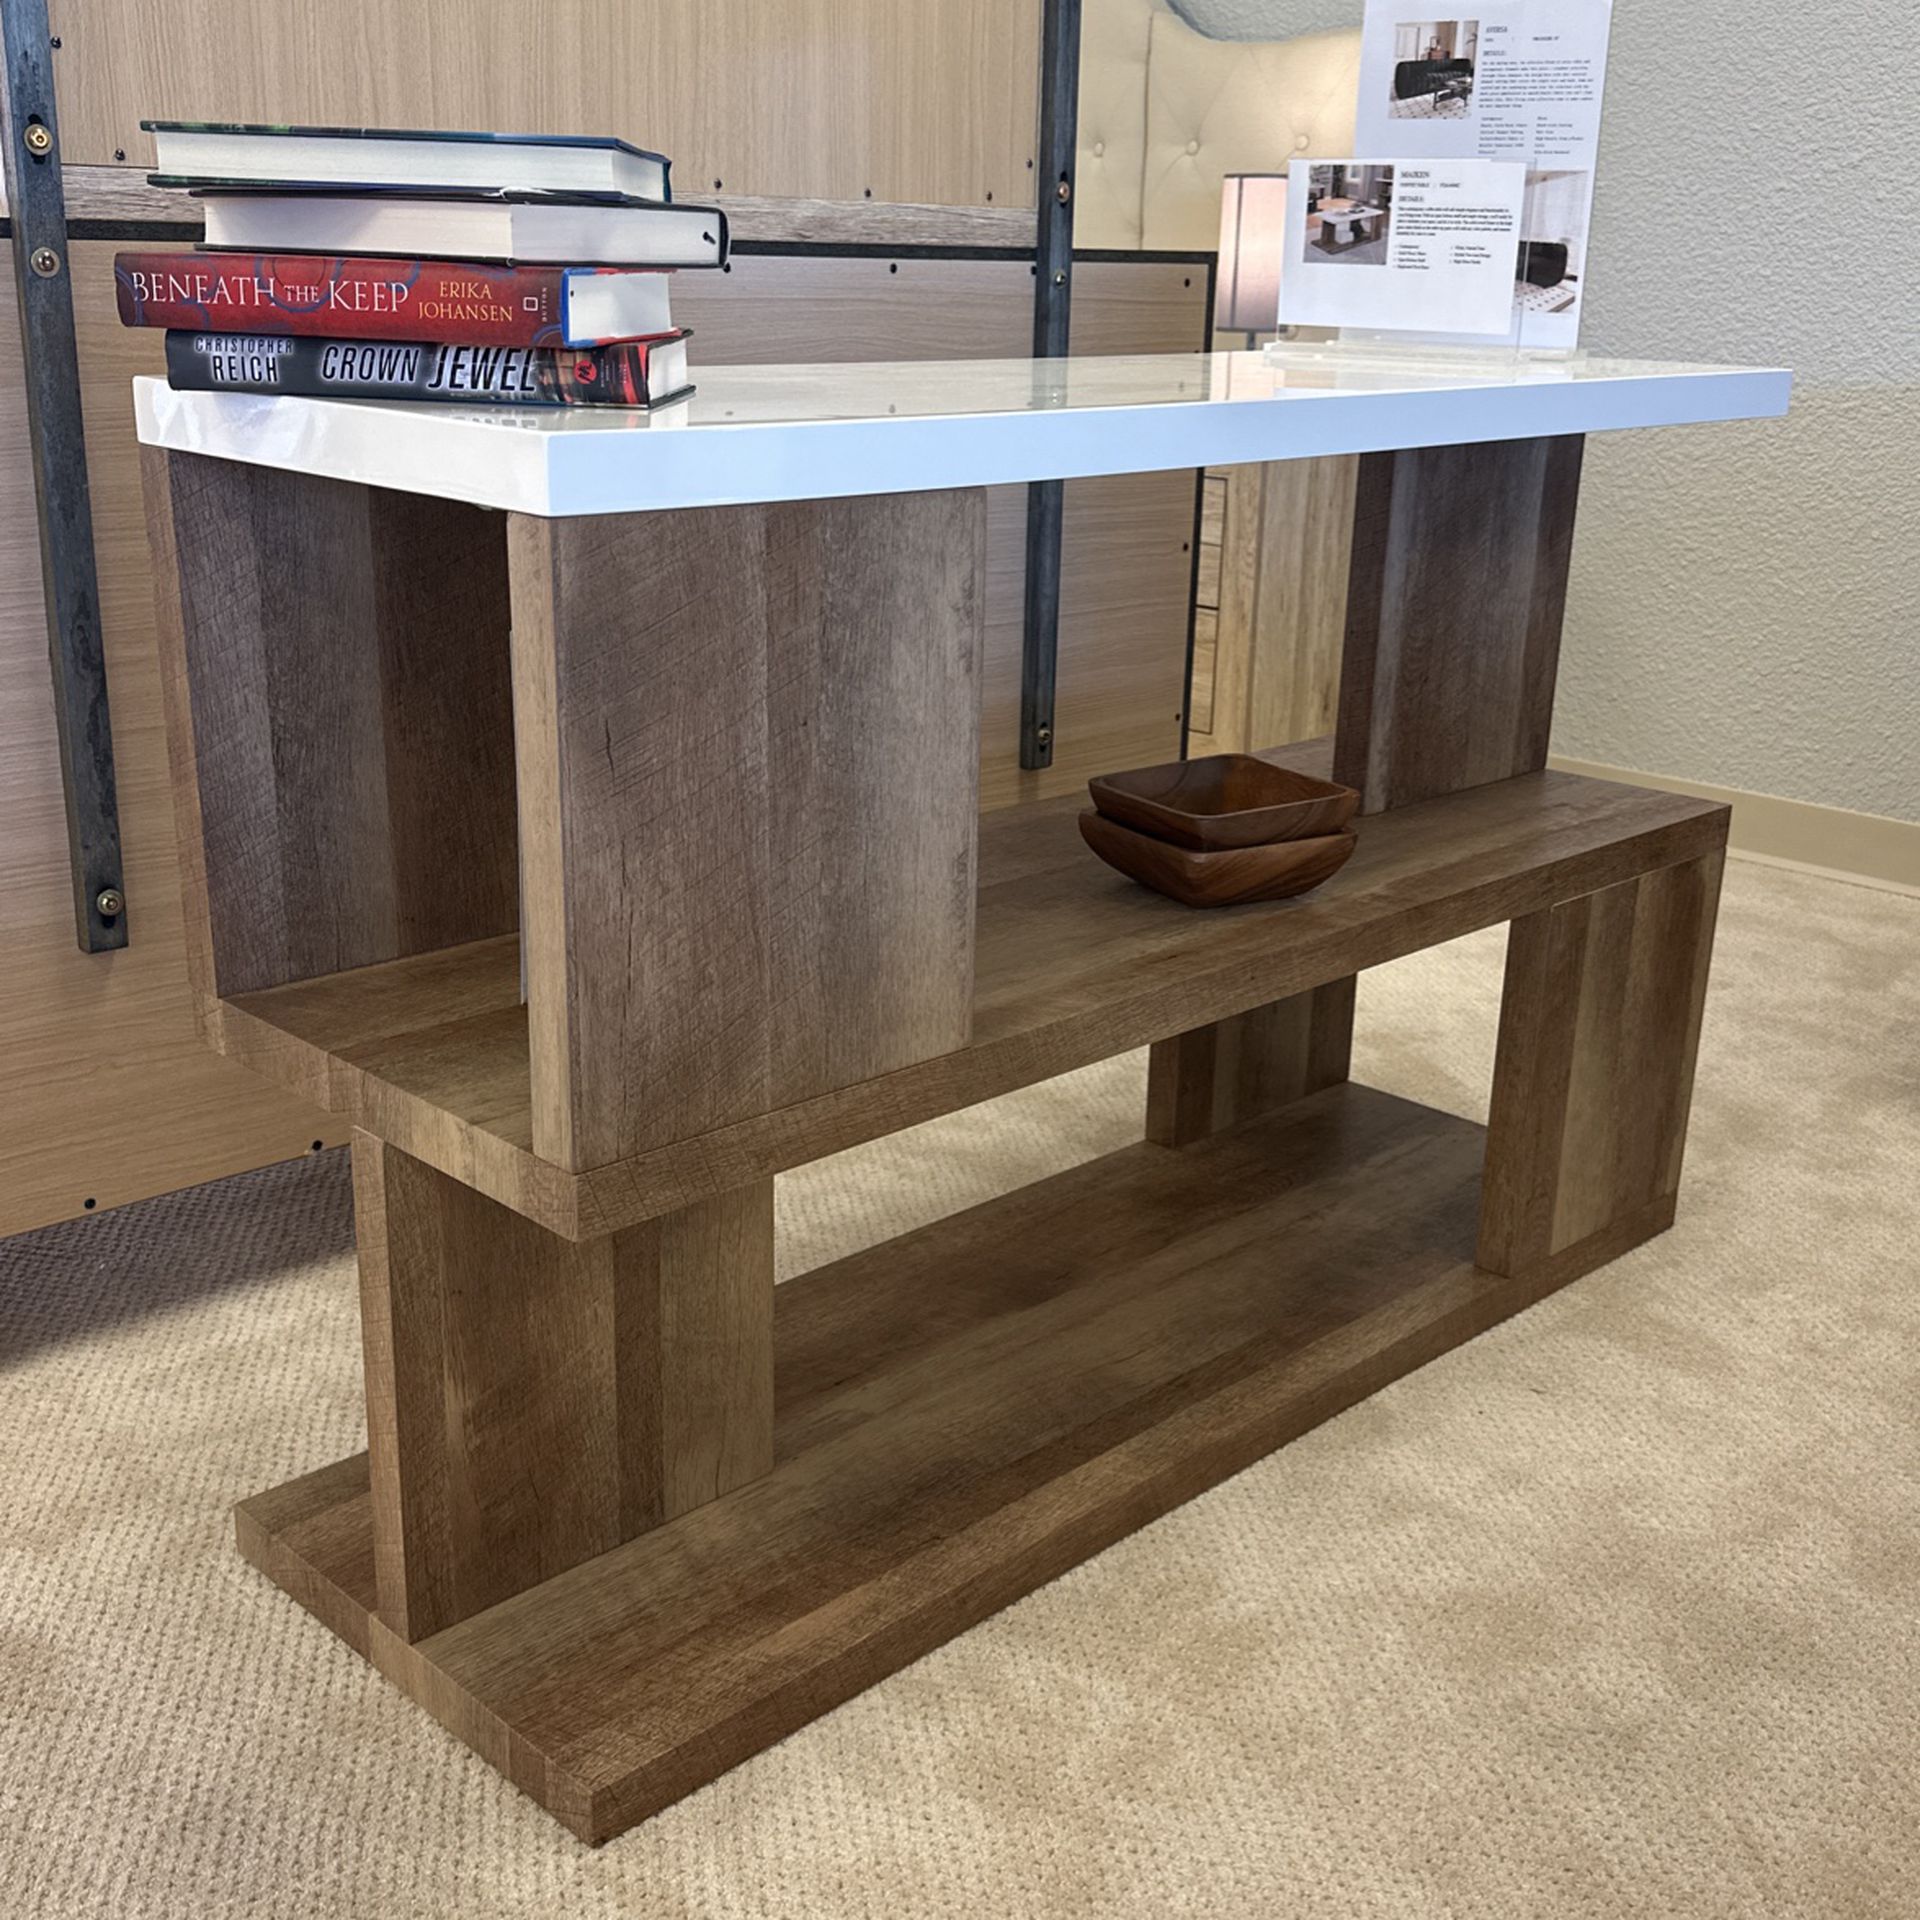 ✅Sofa Table Tv contemporary Console Table Ample Storage, Solid, Wood, Two-Tone Design, High Gloss Lacquer (In Store Item